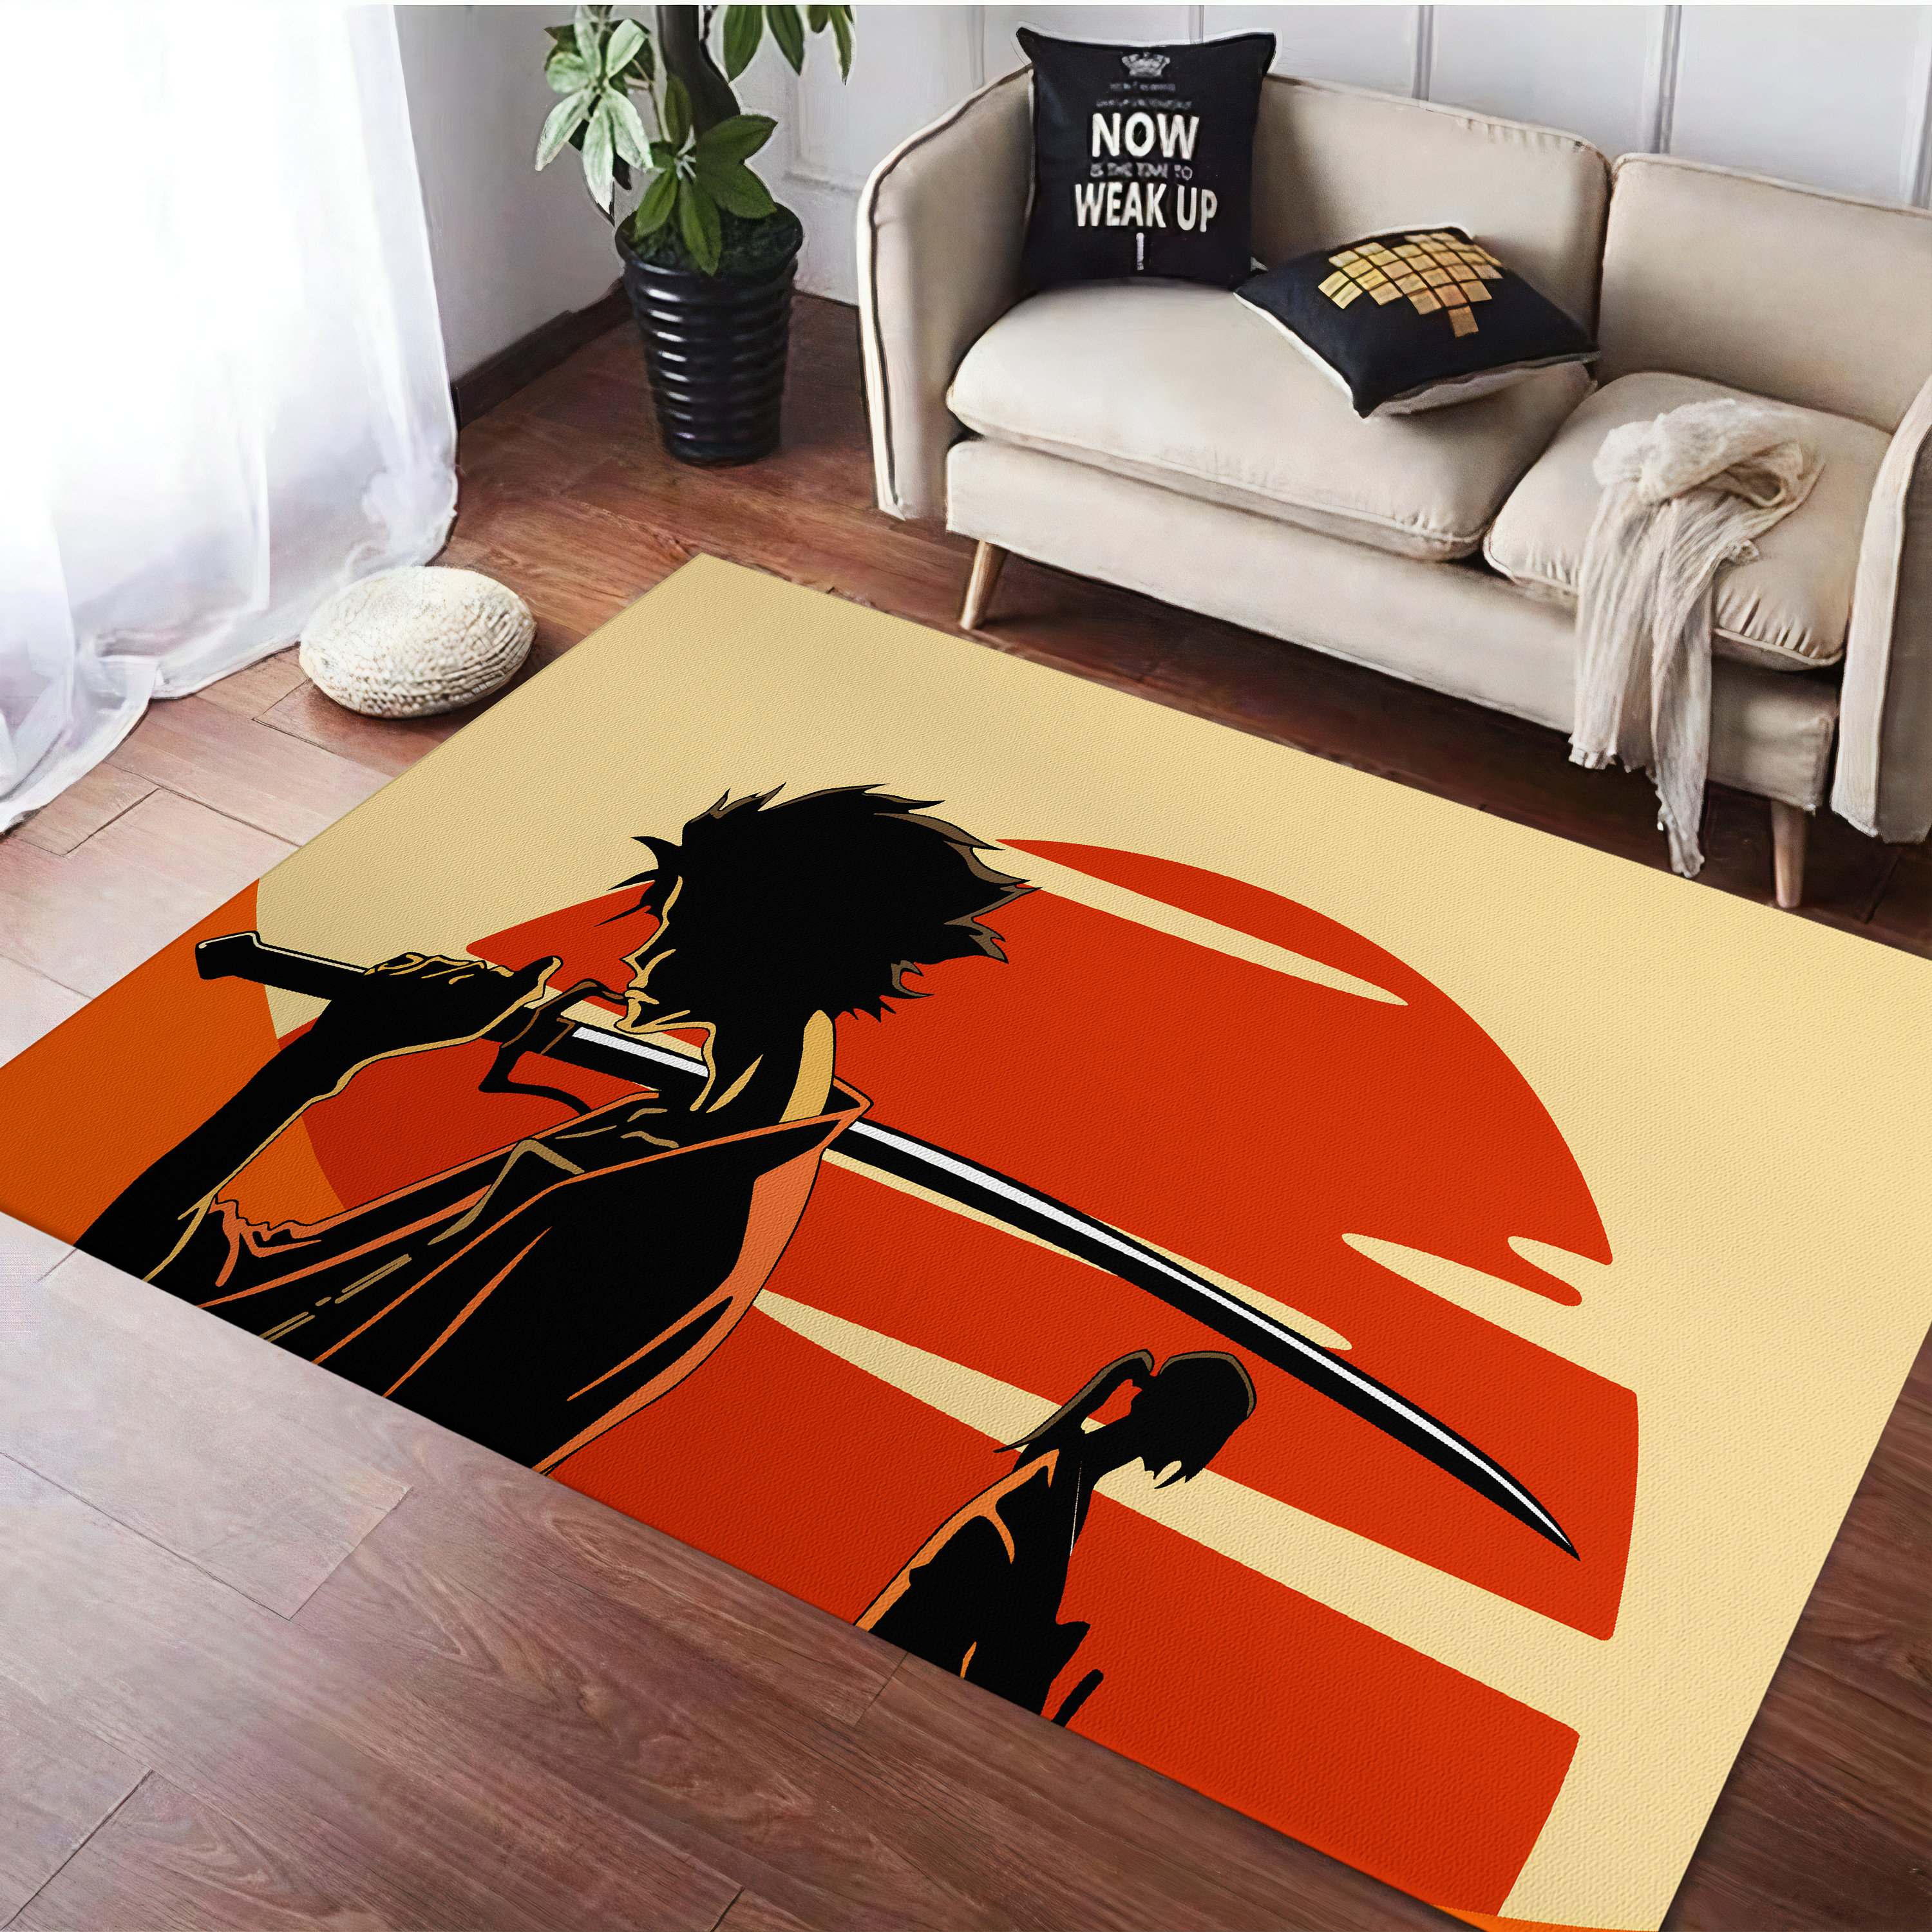 Shop One Piece Anime Room Decor Wallpaper online  Lazadacomph